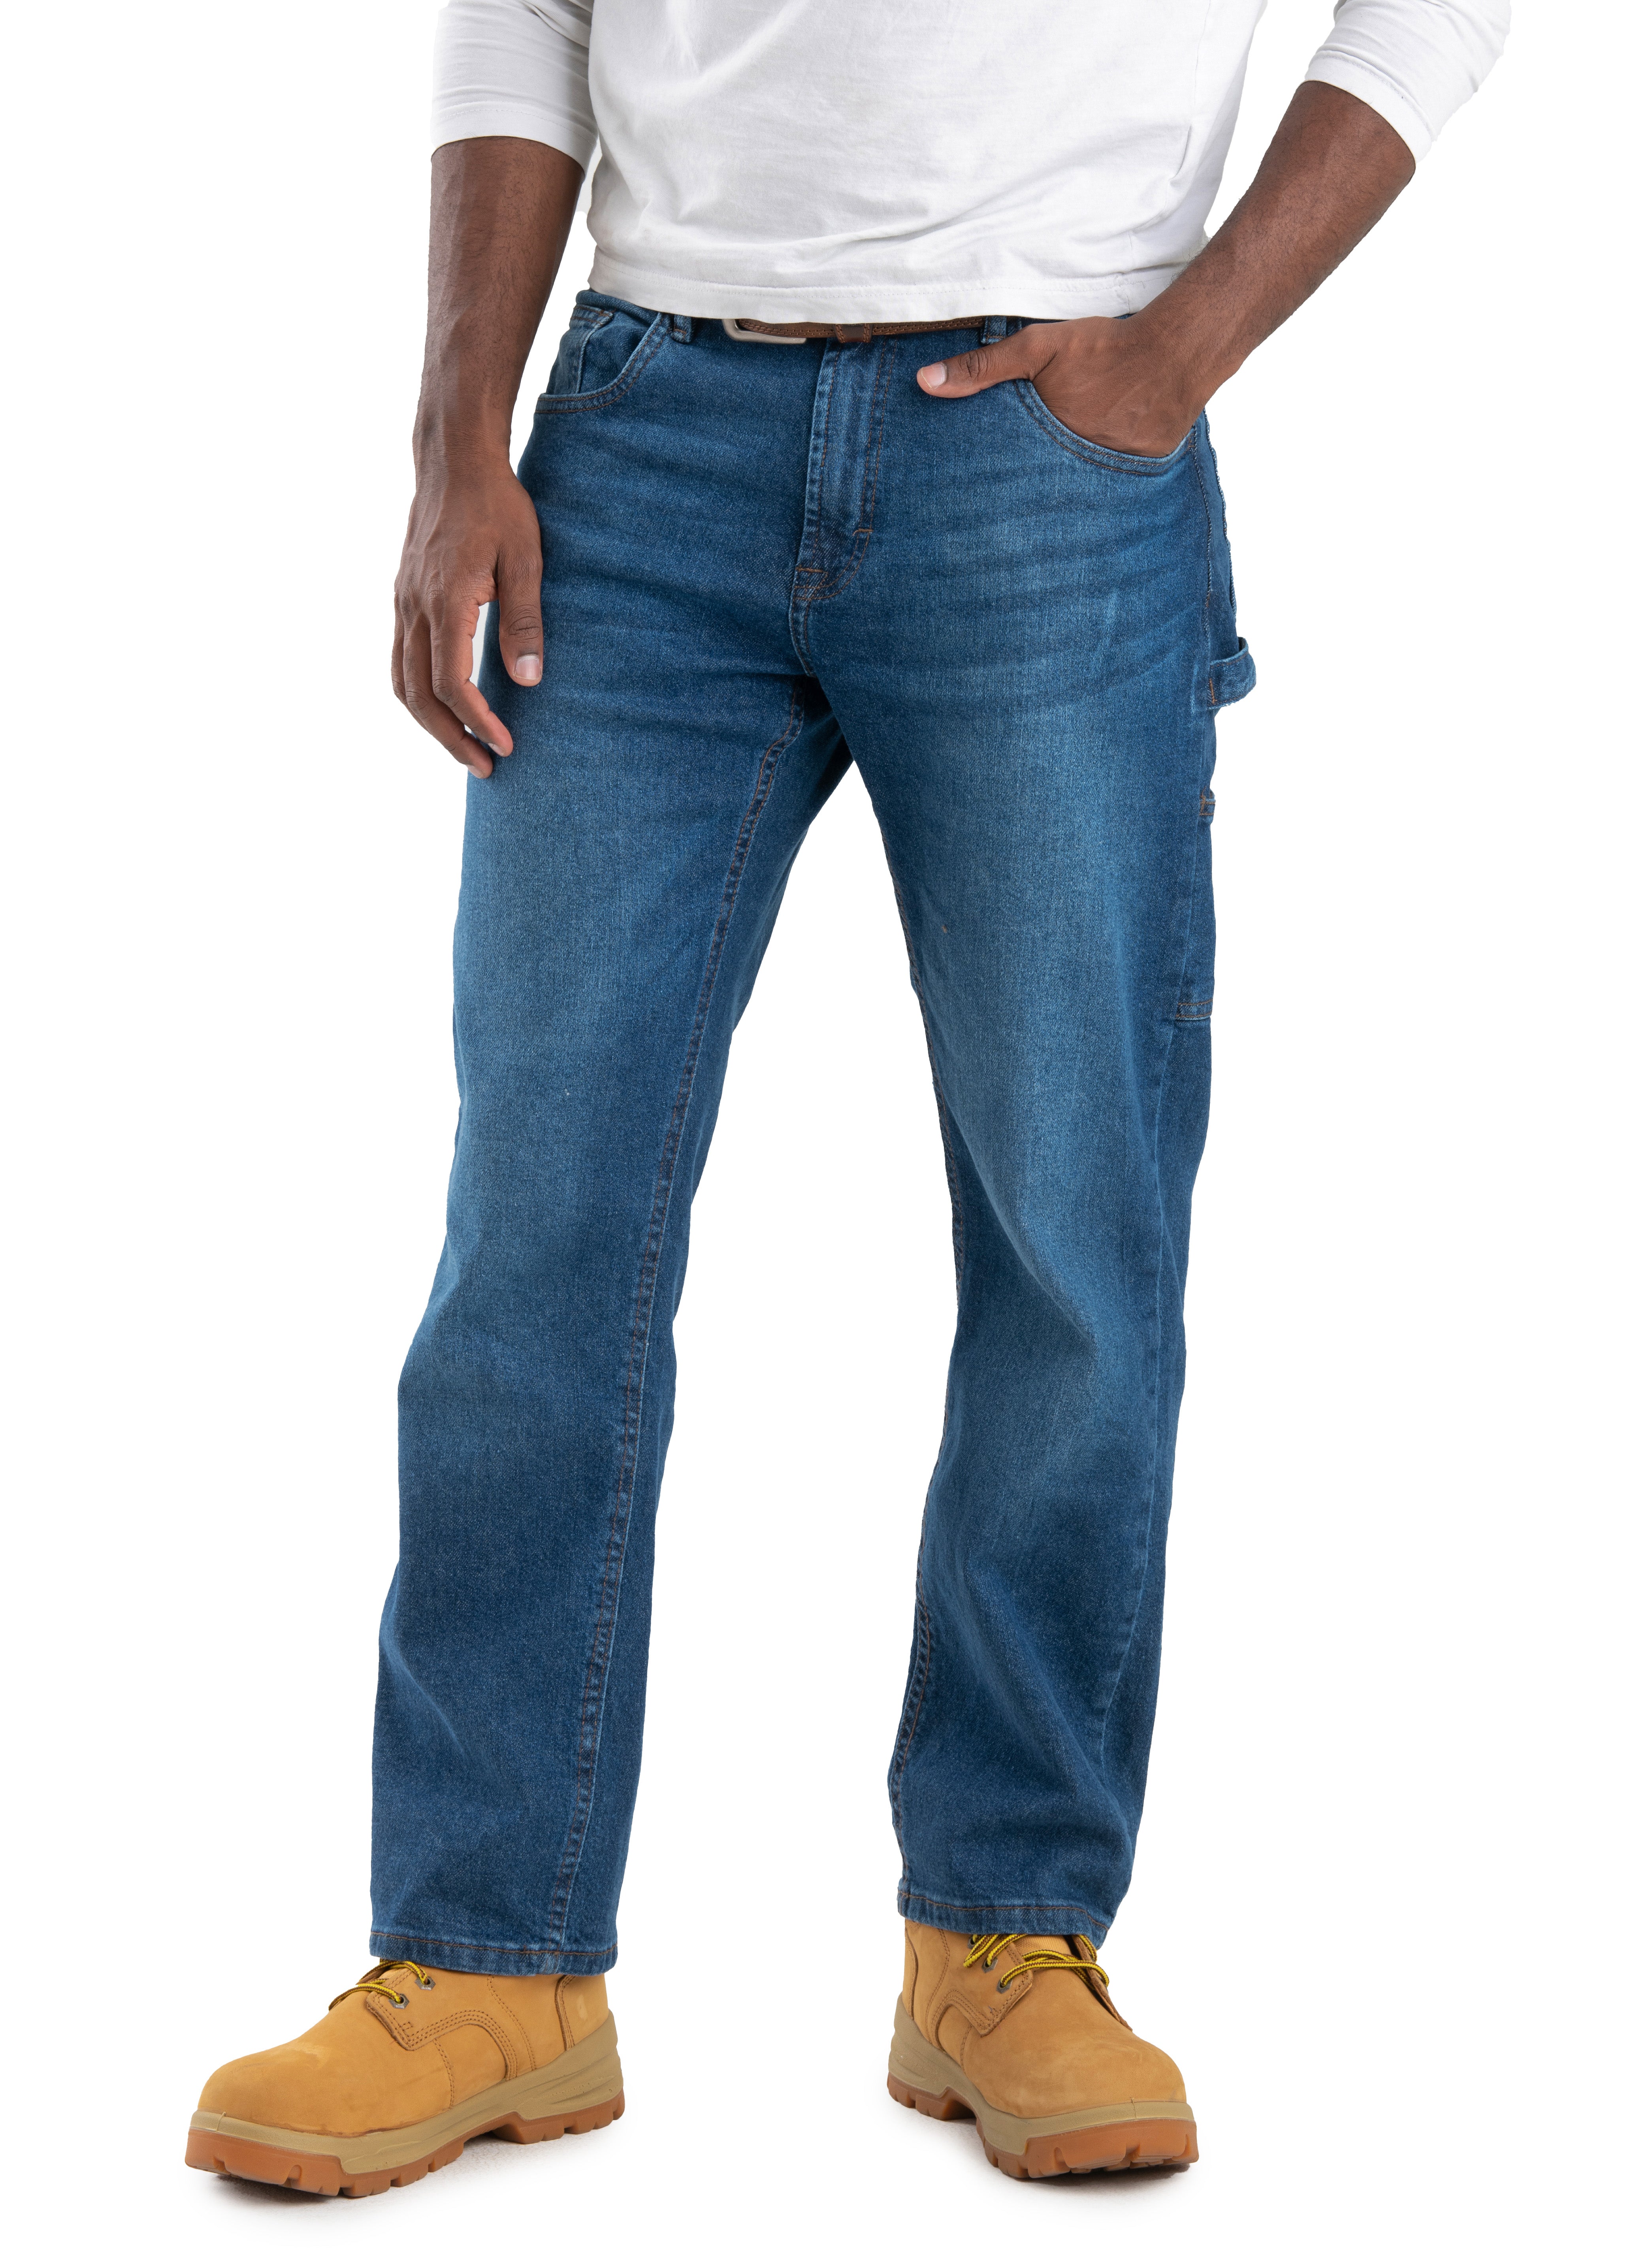 Big and Tall Flannel Lined Jeans for  to Size 60 and